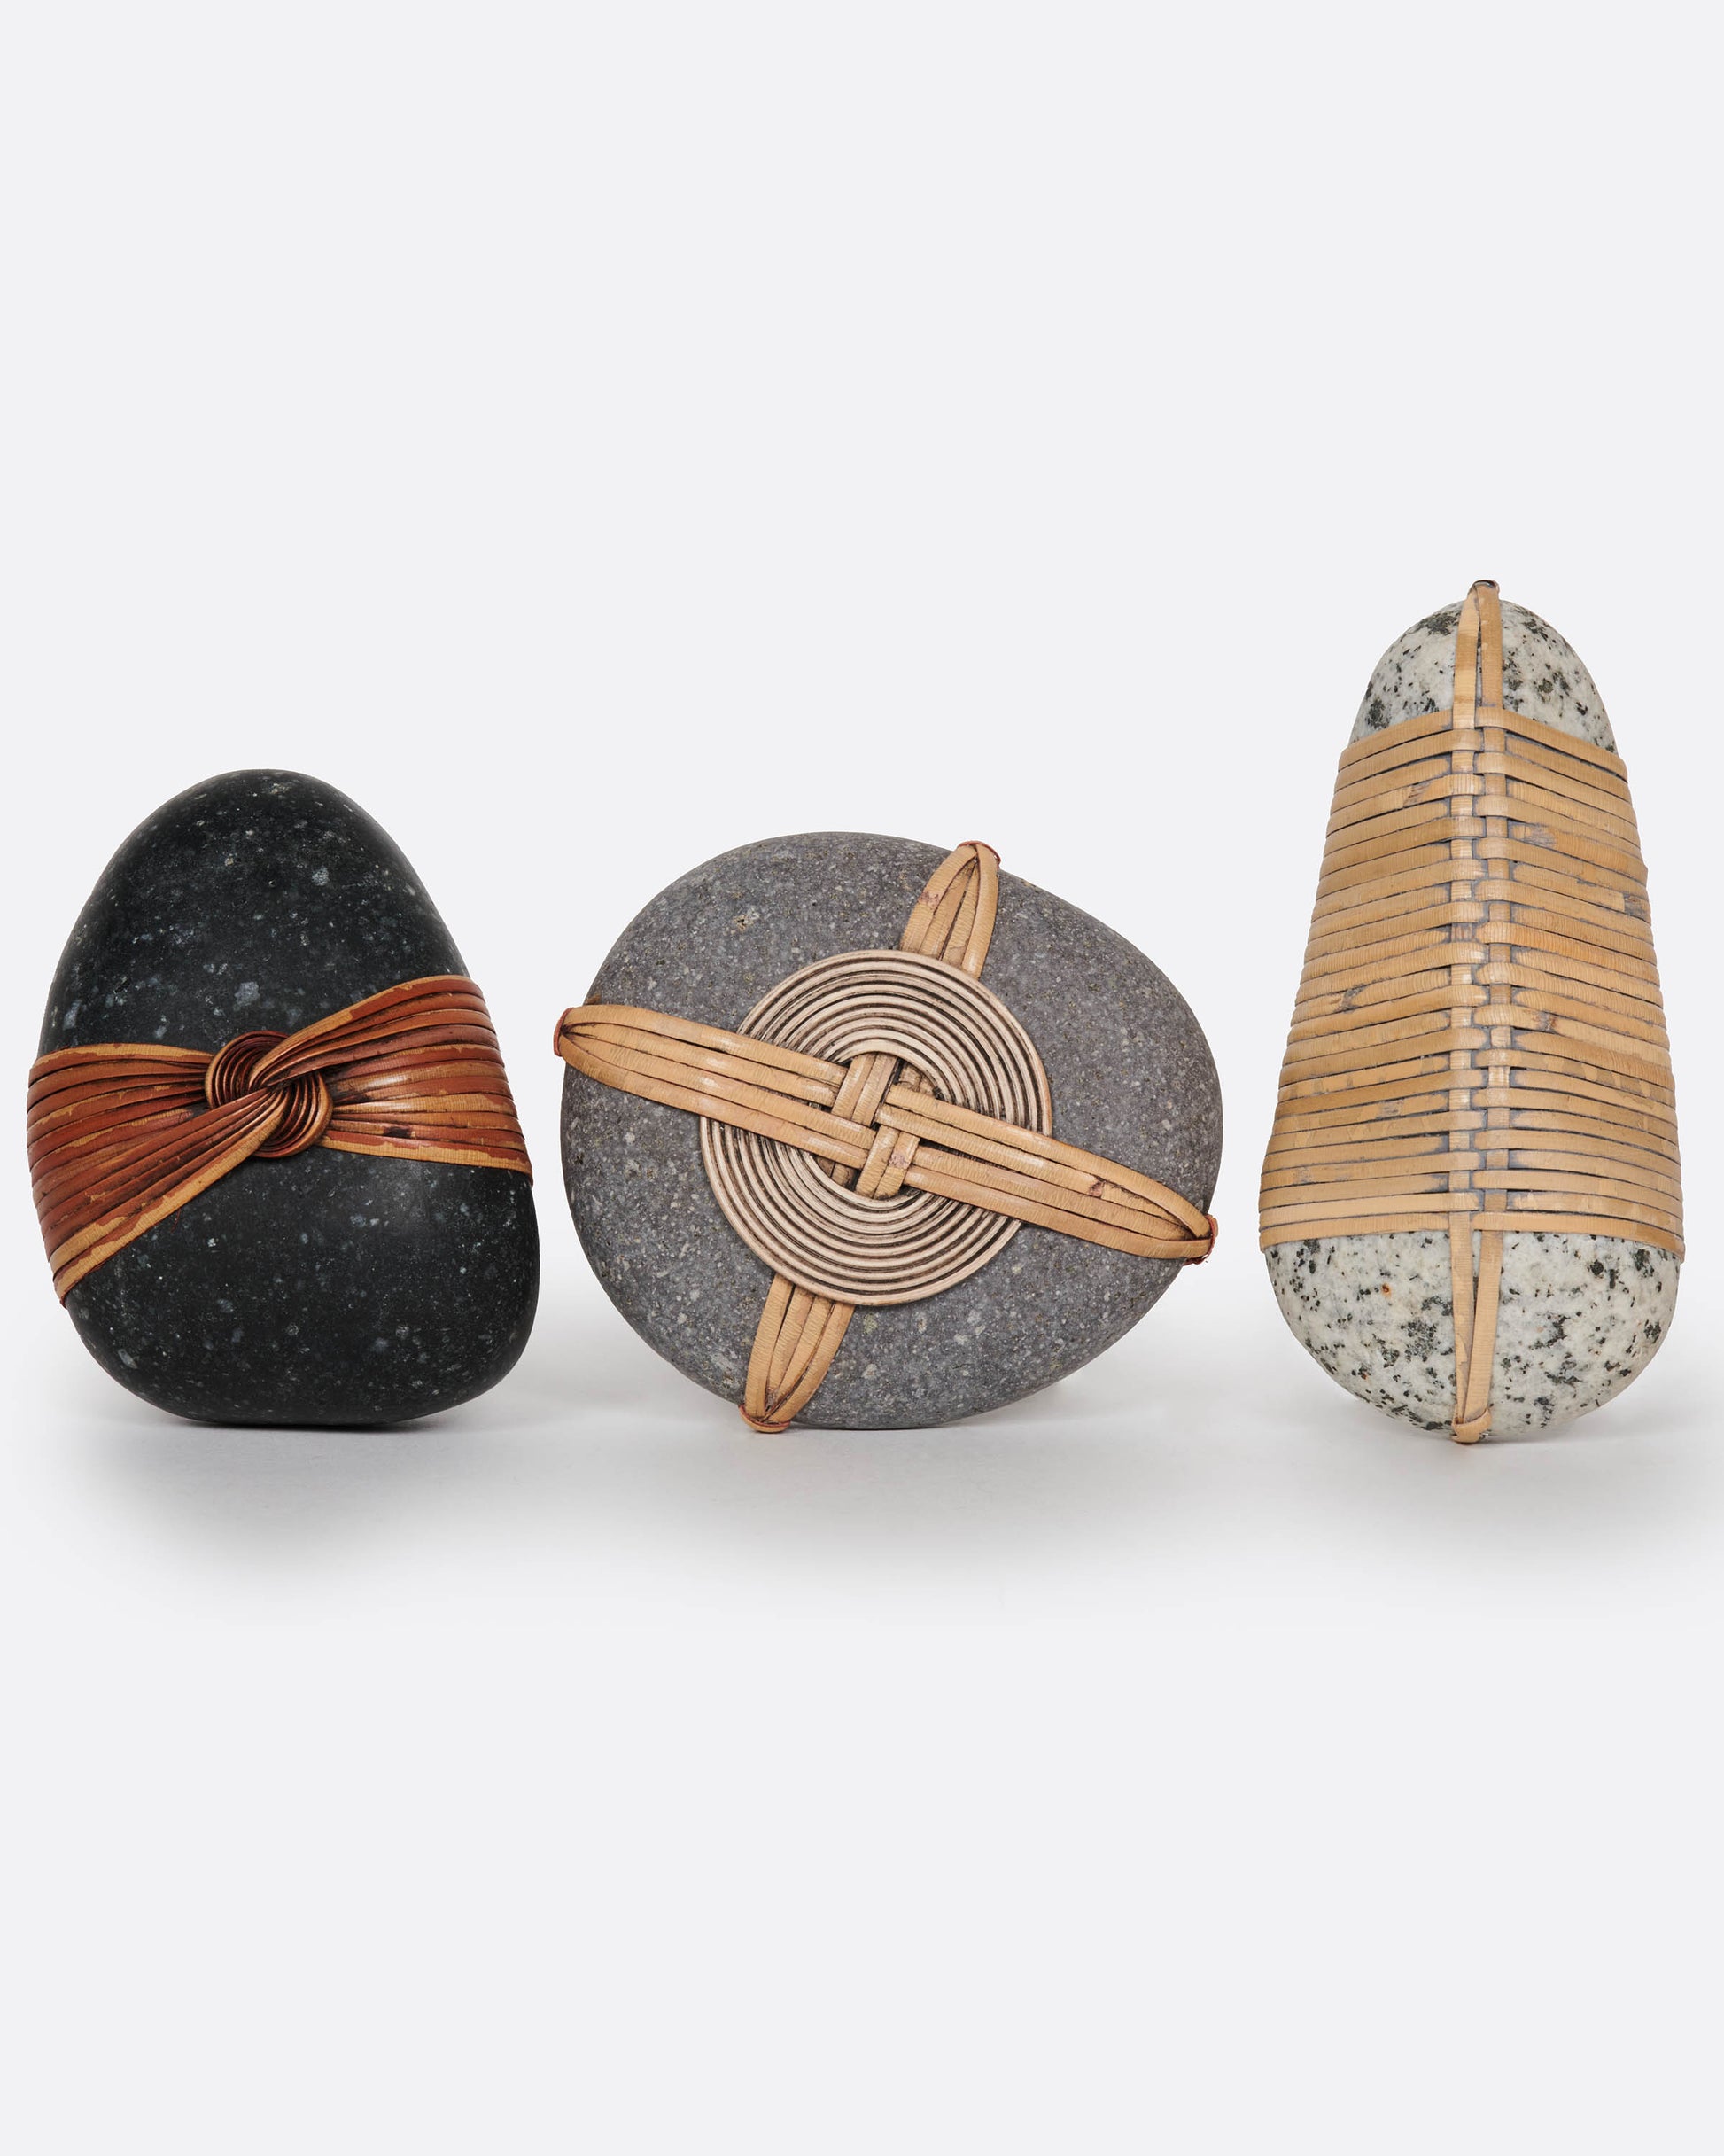 A group of three blessing stones.